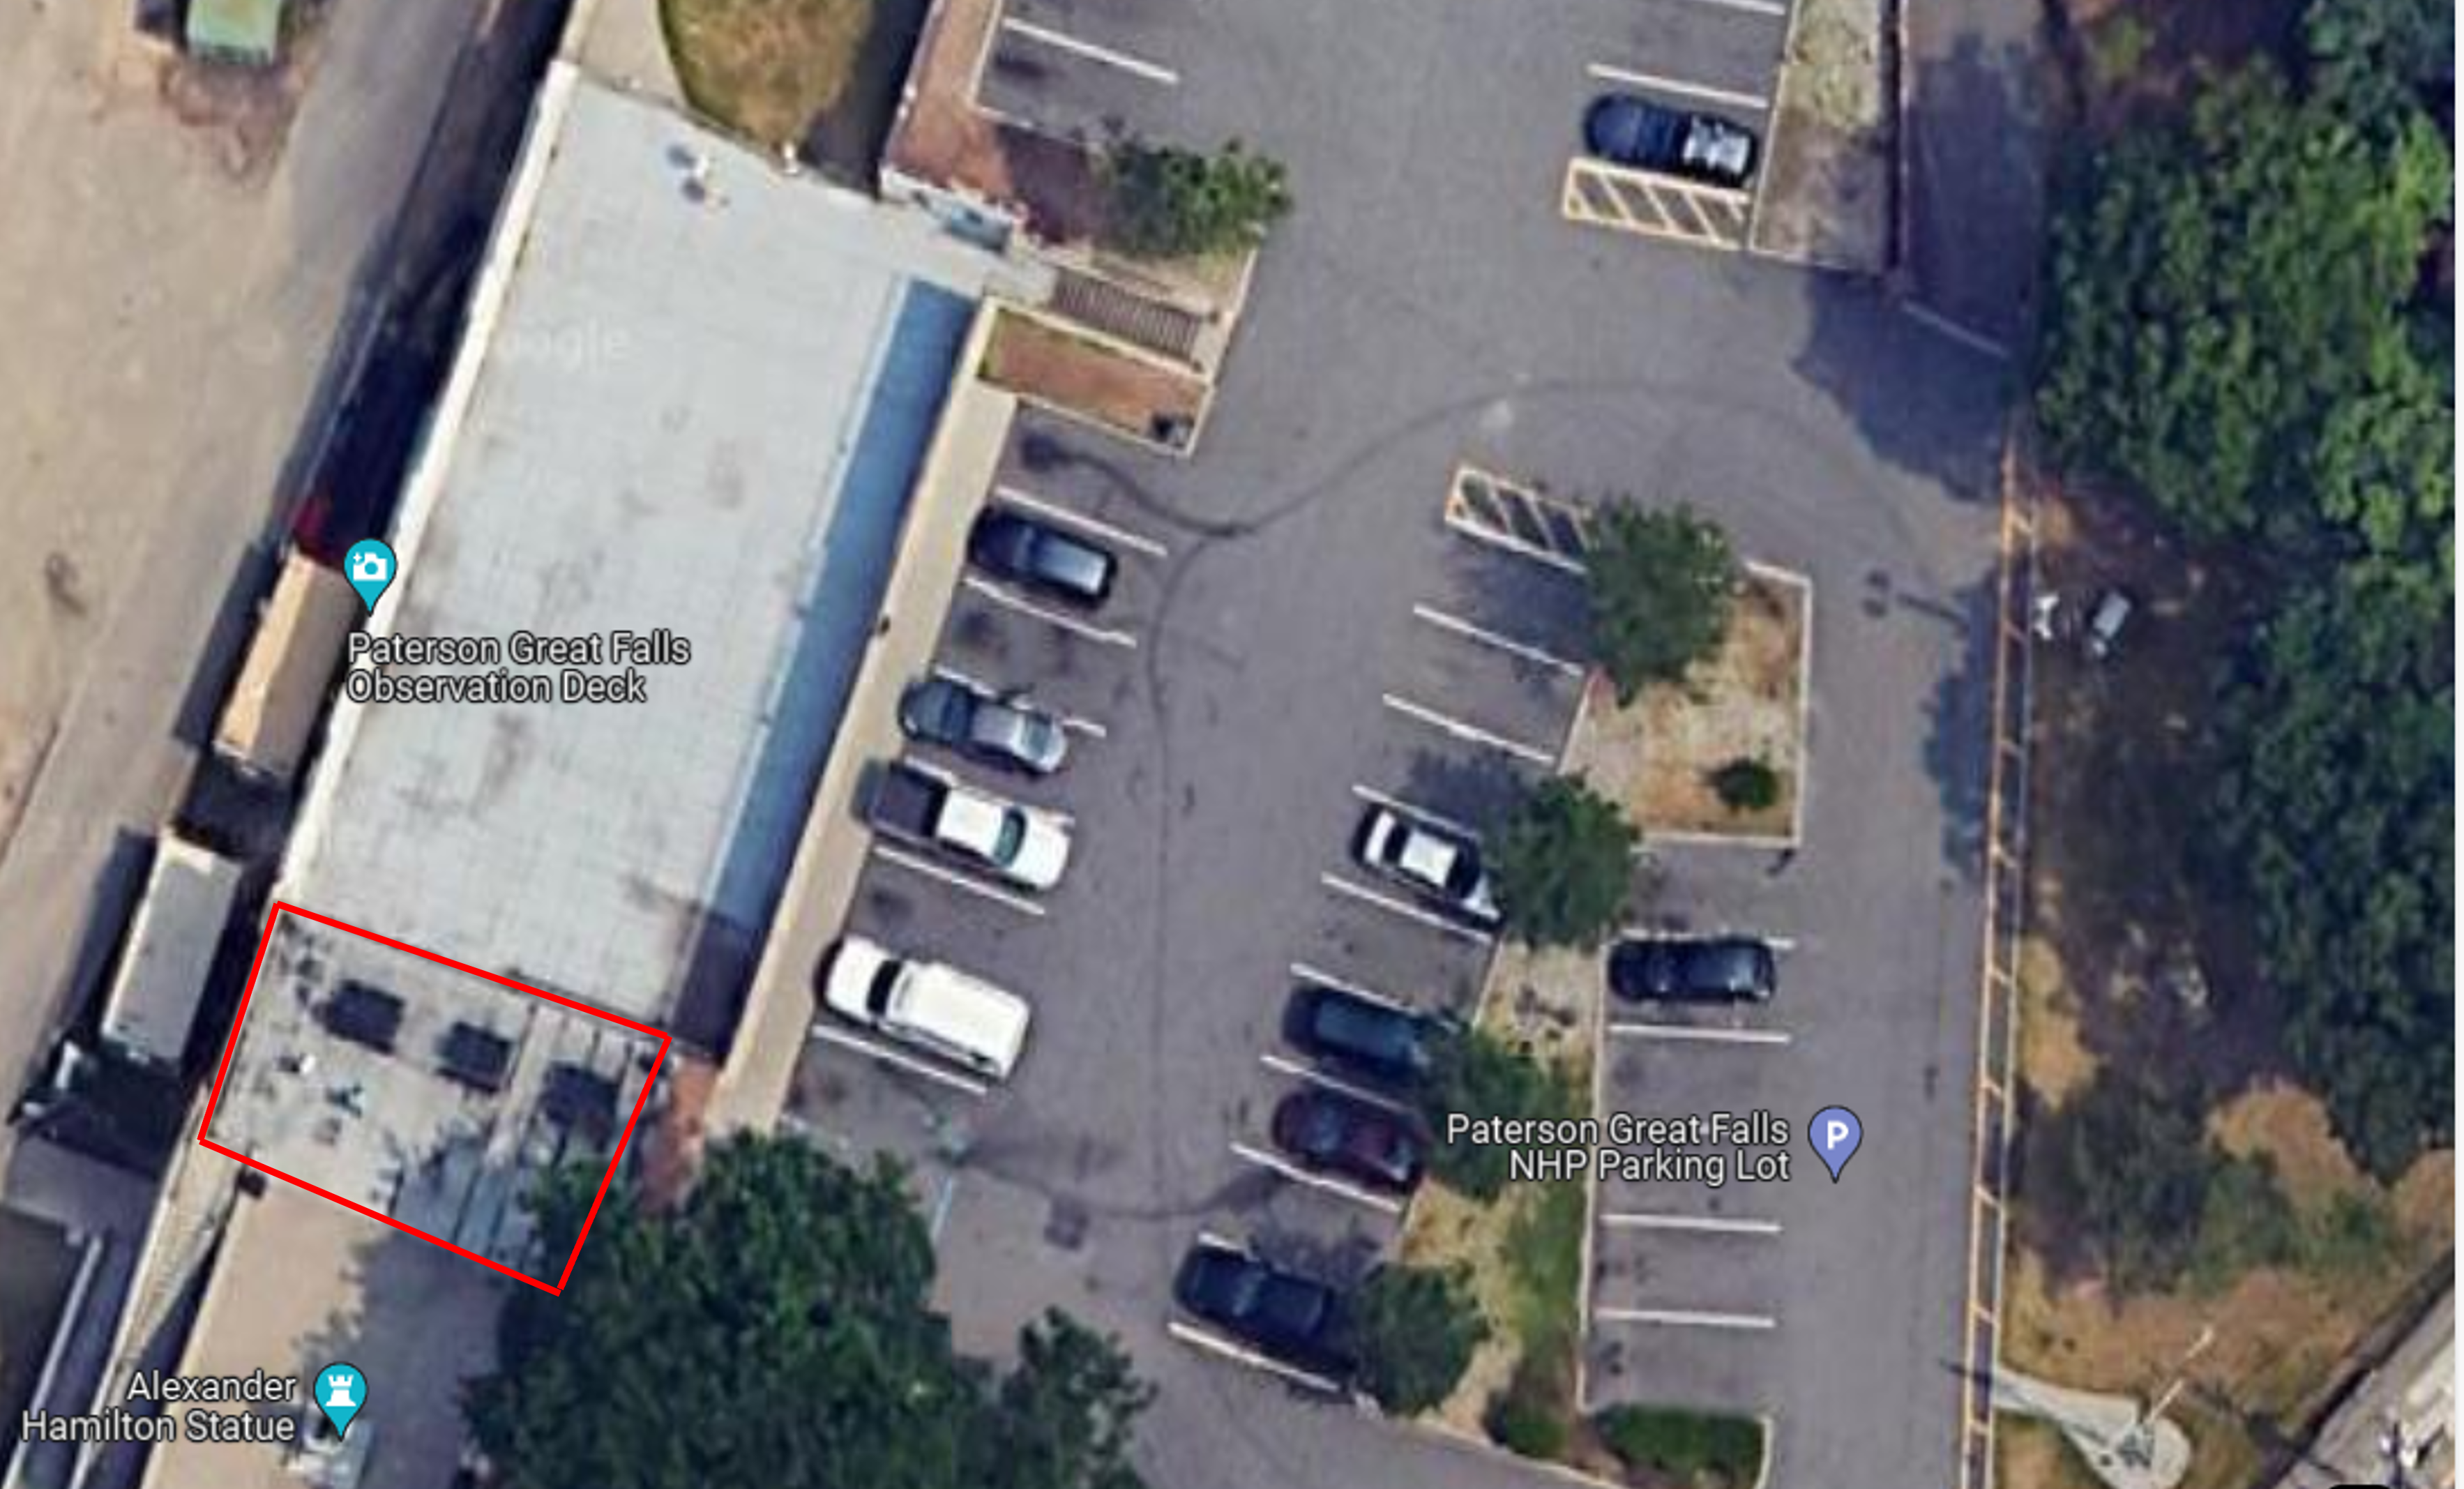 A satellite map view of the parking lot at Paterson Great Falls National Historical Park, located at 72 McBride Avenue Extension, Paterson NJ 07501. The upper, northern half of the lot is outlined with a red polygon, marking a First Amendment zone.